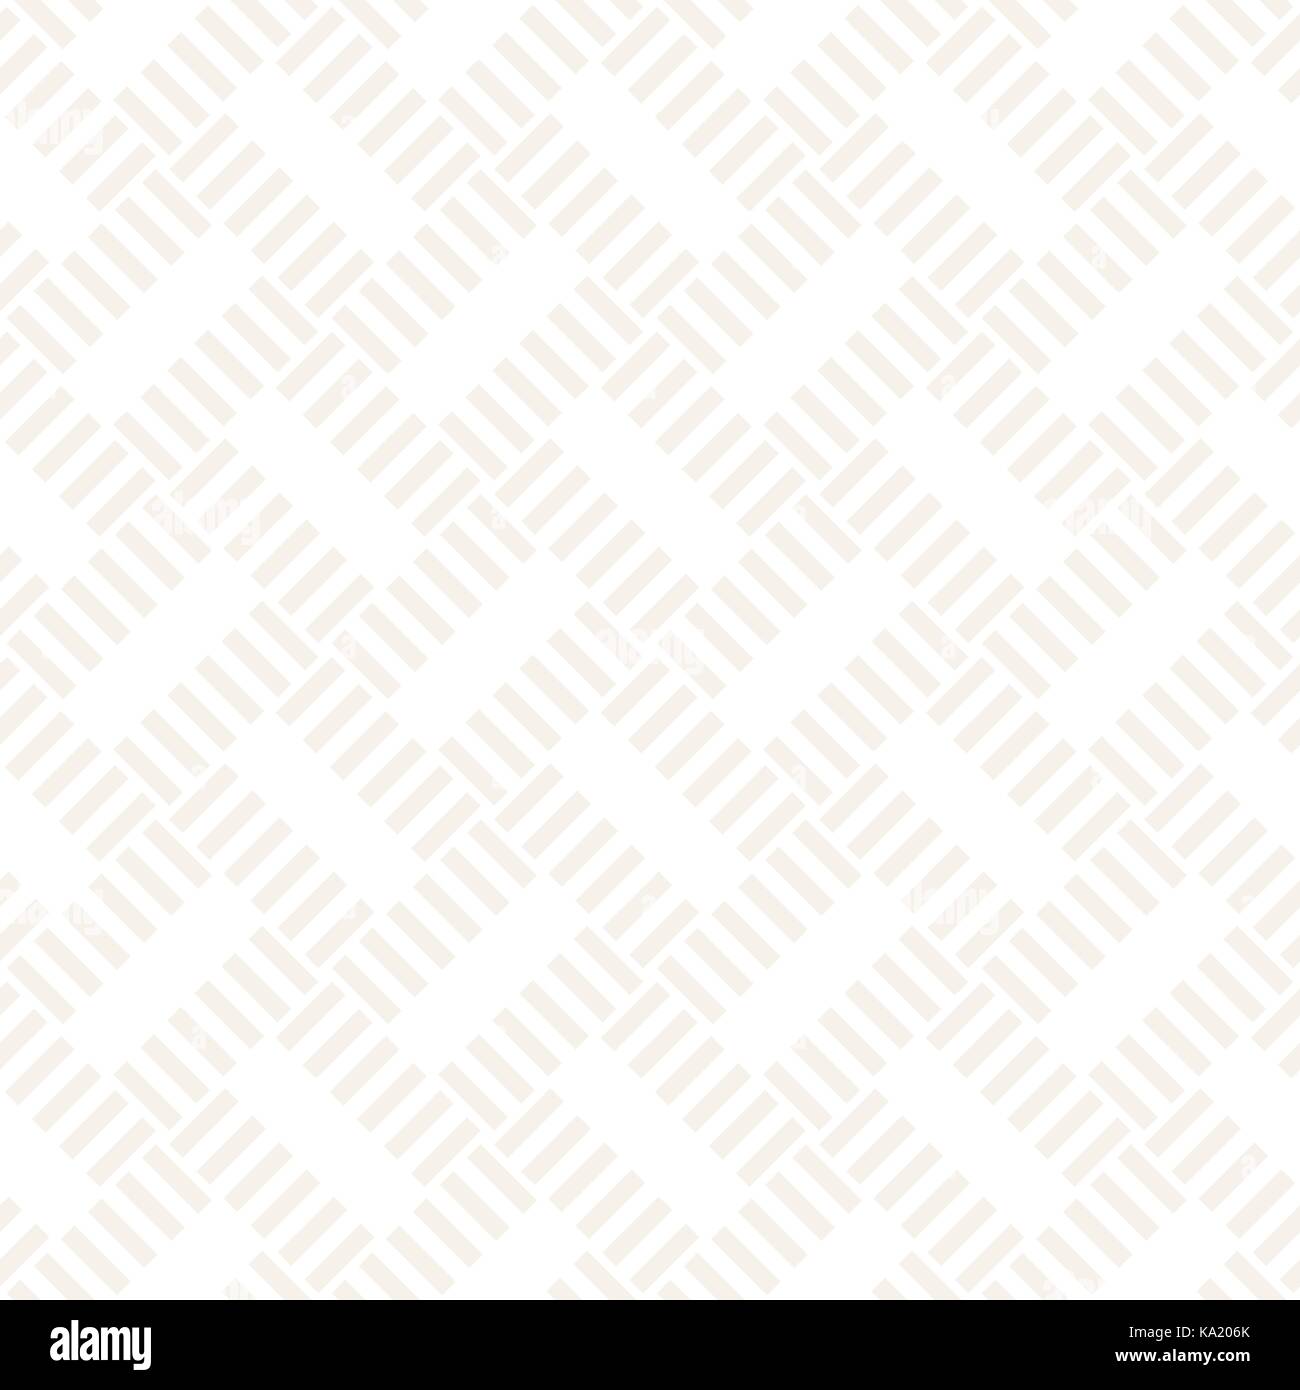 Crosshatch vector seamless geometric pattern. Crossed graphic rectangles background. Checkered motif. Seamless subtle texture of crosshatched bold lines. Trellis fabric print. Stock Vector